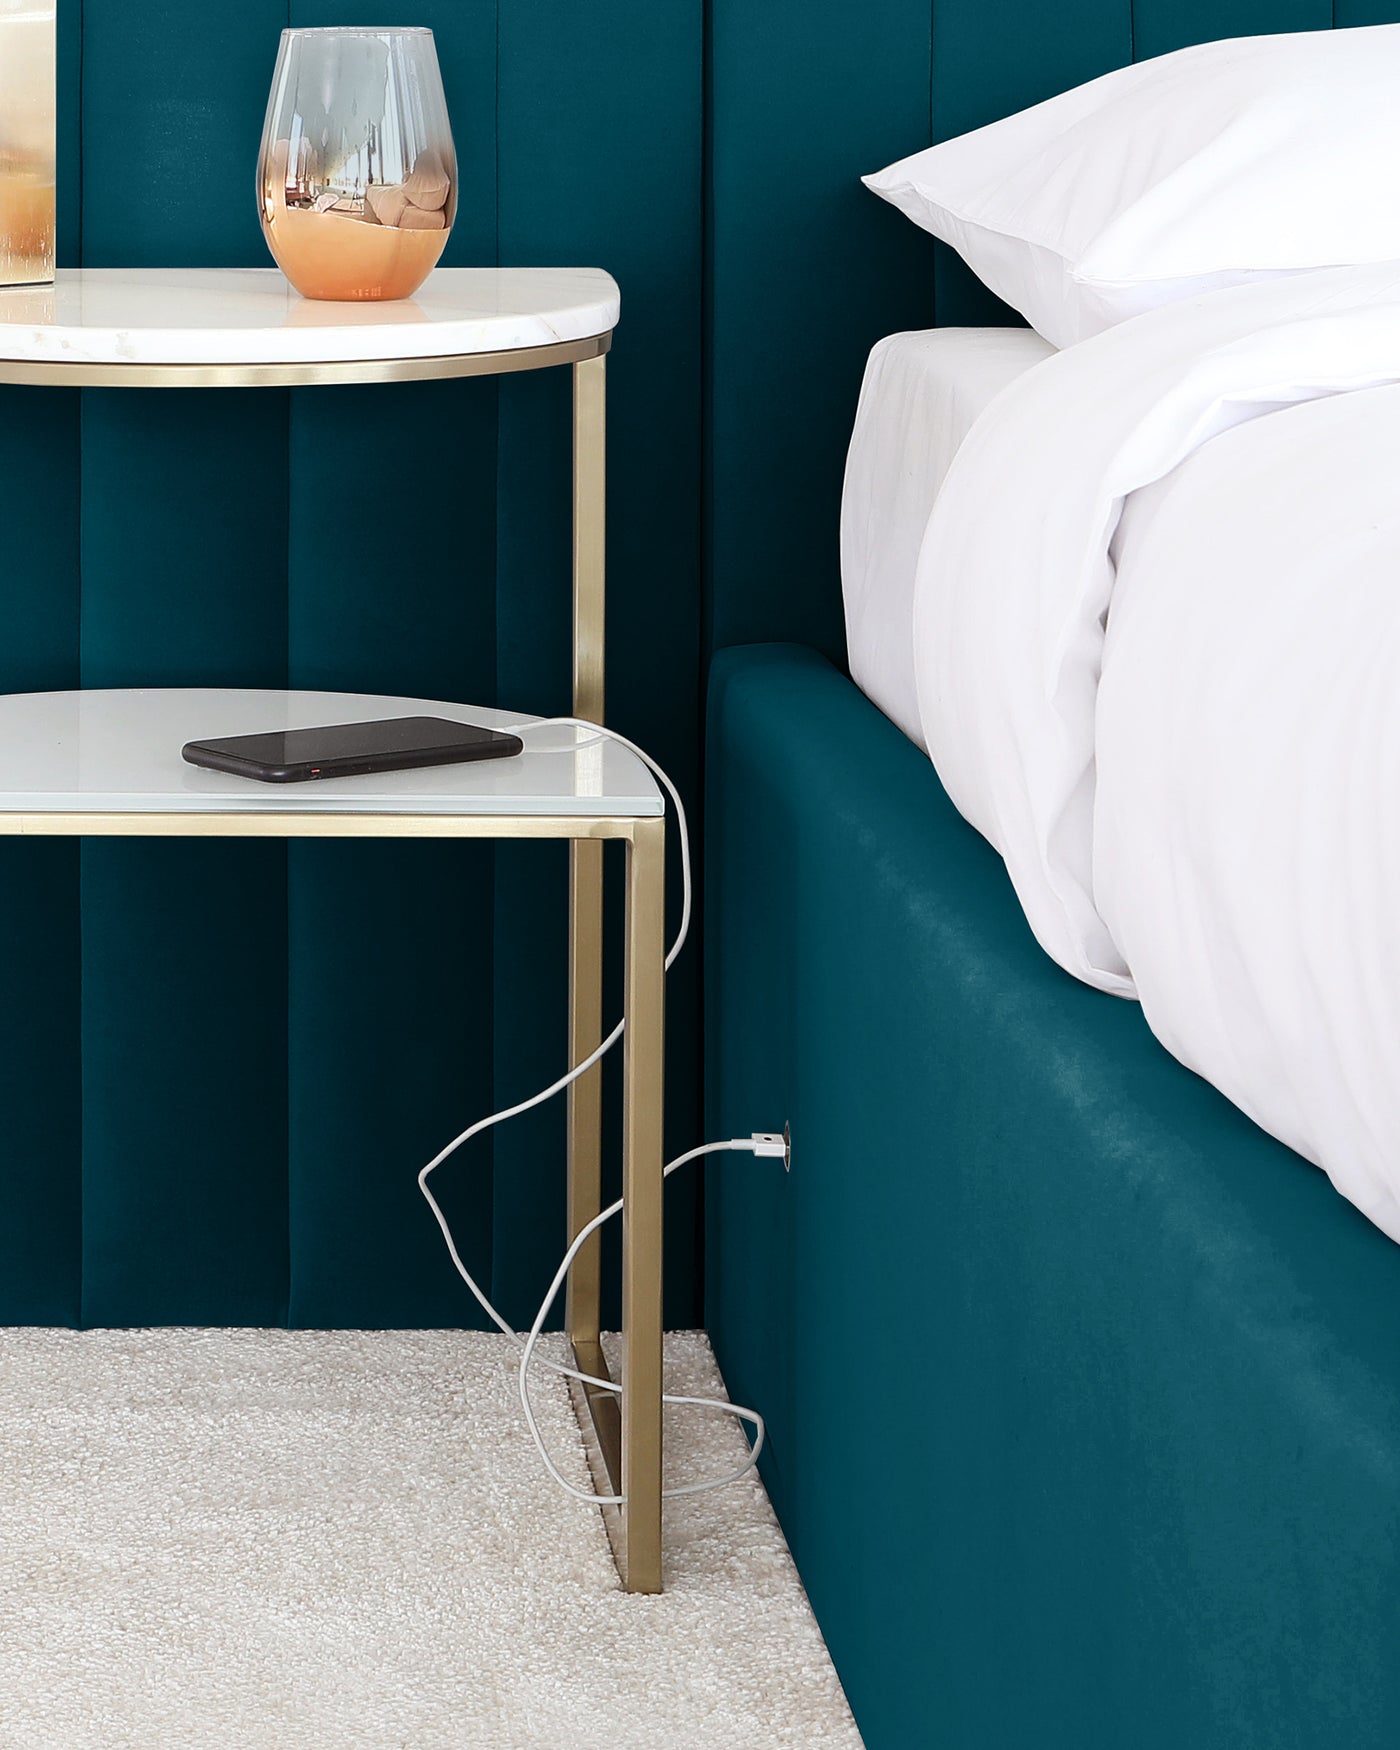 Elegant modern bedside table with a marble-like top and gold-coloured metal frame, next to a plush teal upholstered bed with white bedding. A decorative glass vase rests on the table's upper tier.